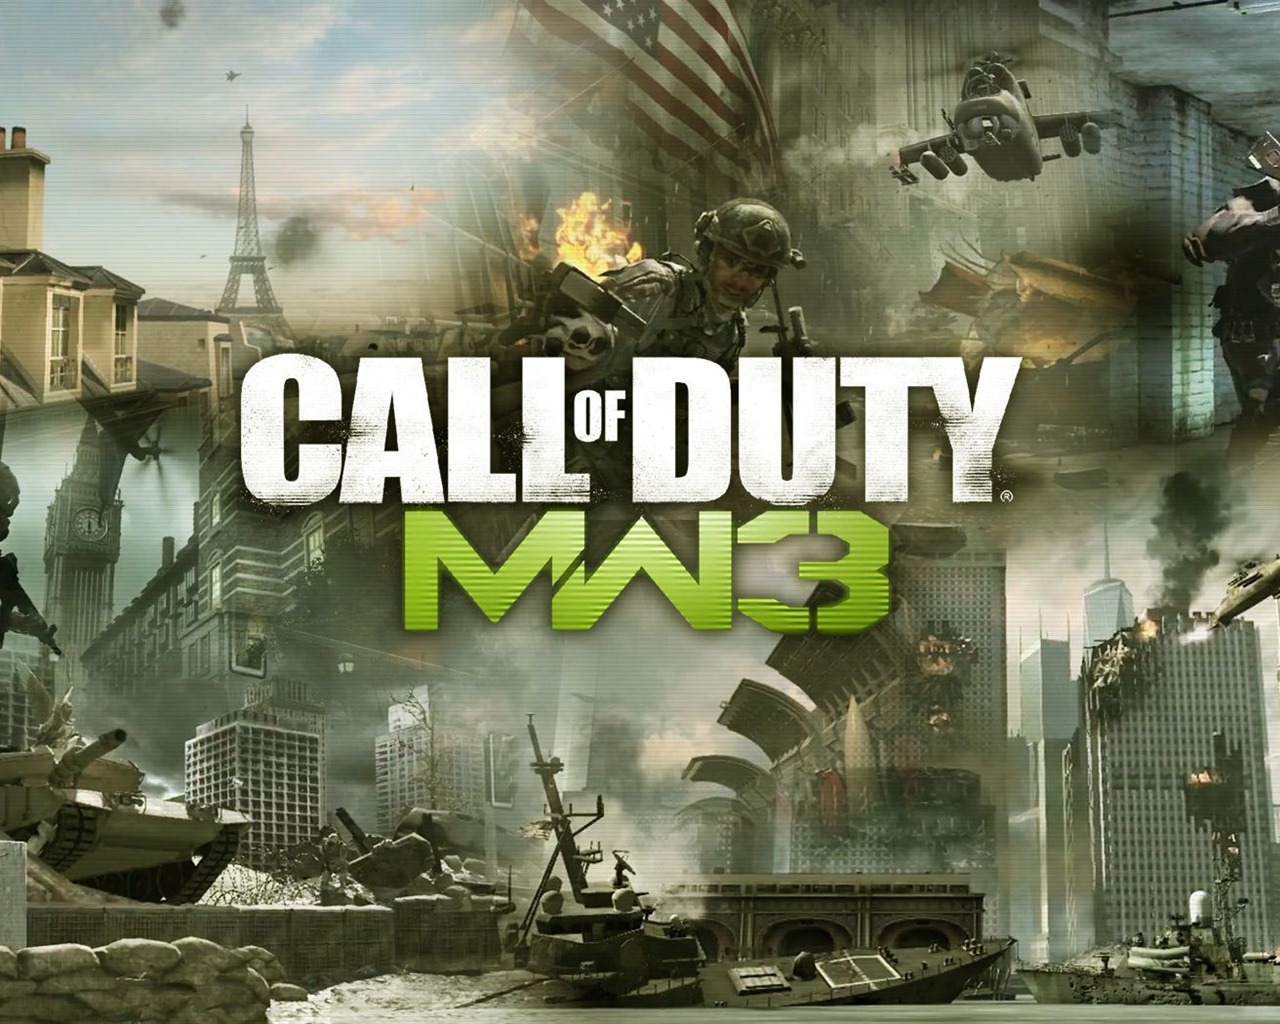 Call of Duty: MW3 HD wallpapers #5 - 1280x1024